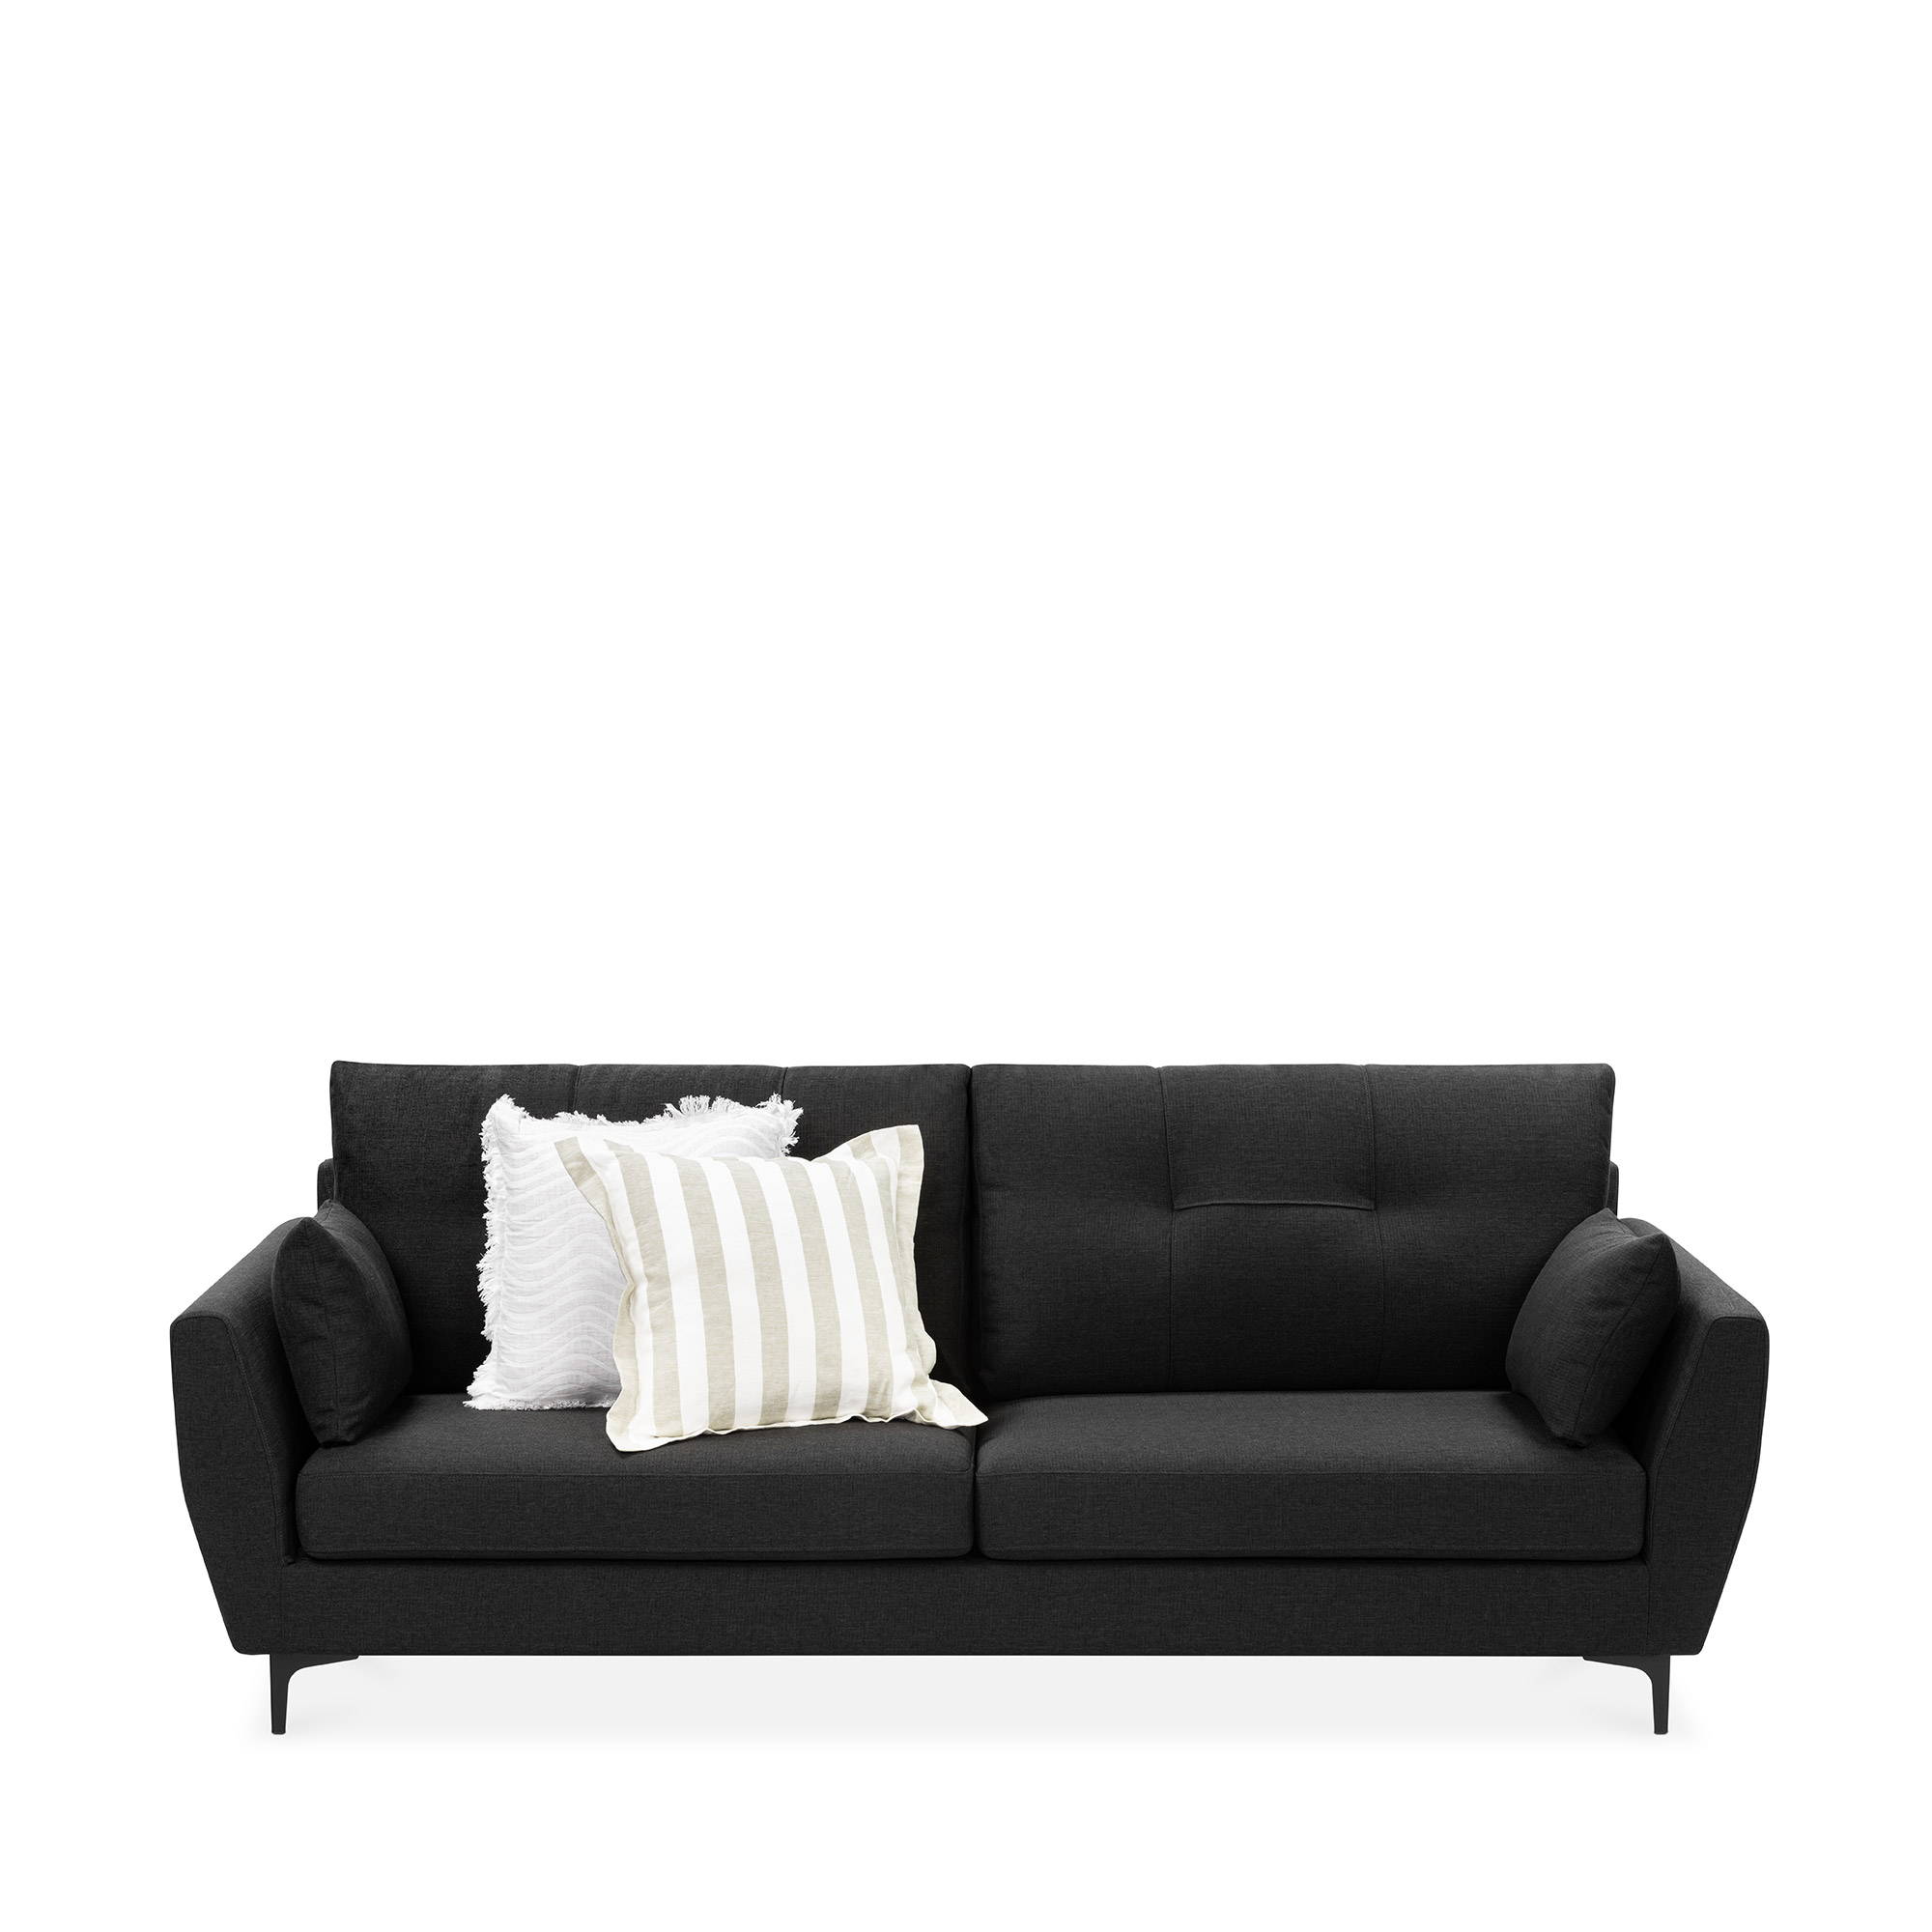 Halmstad range of fabric sofas and couches